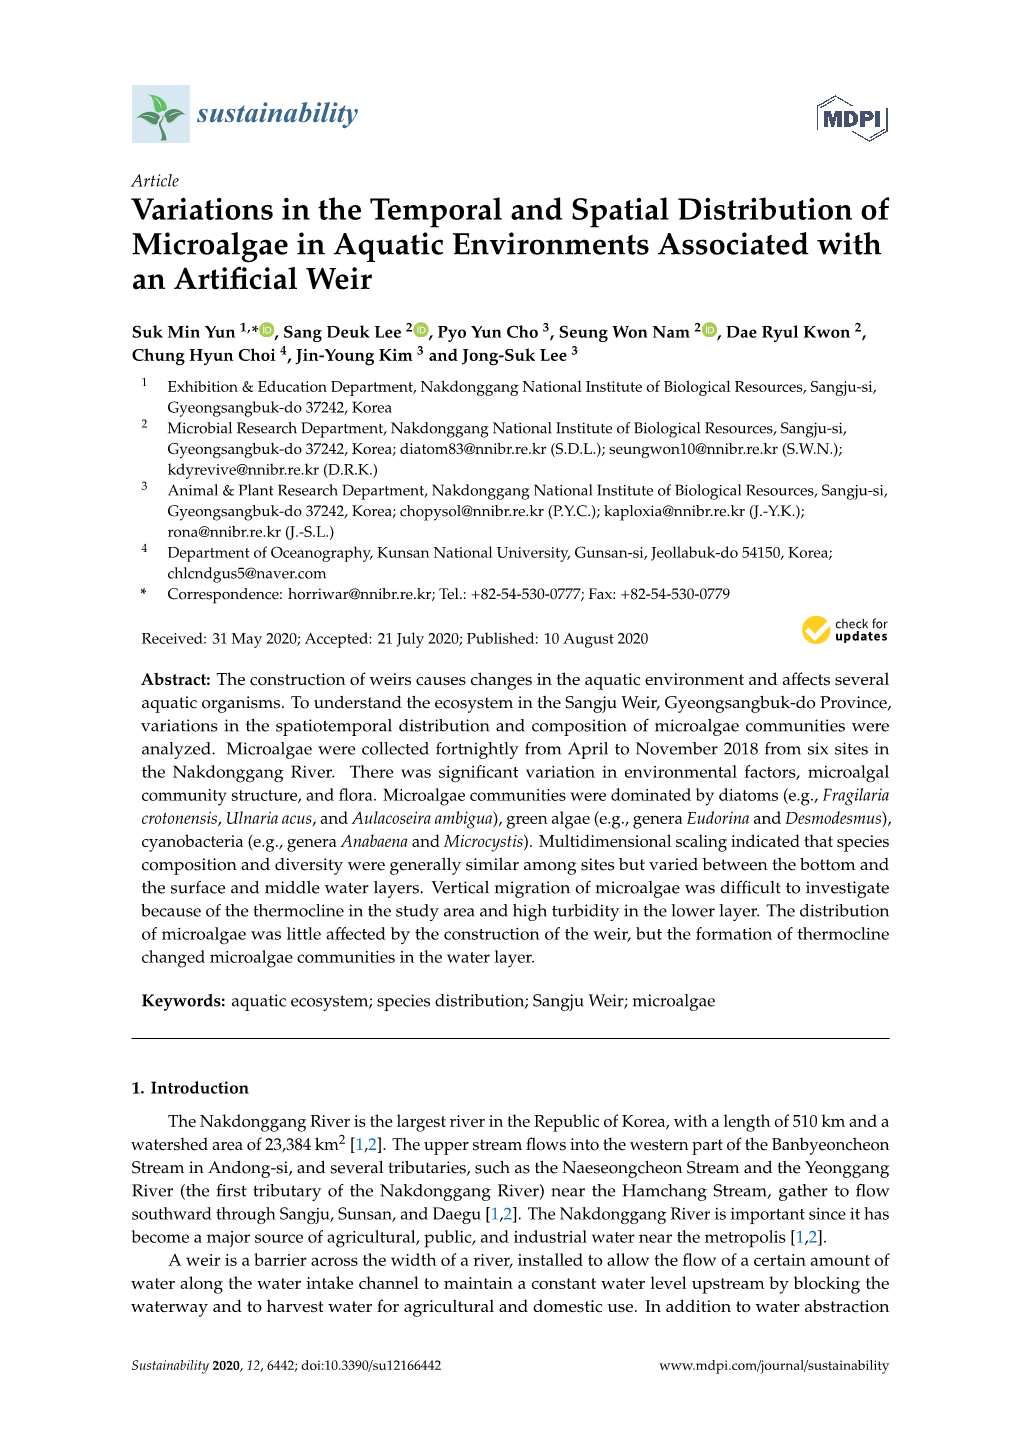 Variations in the Temporal and Spatial Distribution of Microalgae in Aquatic Environments Associated with an Artiﬁcial Weir